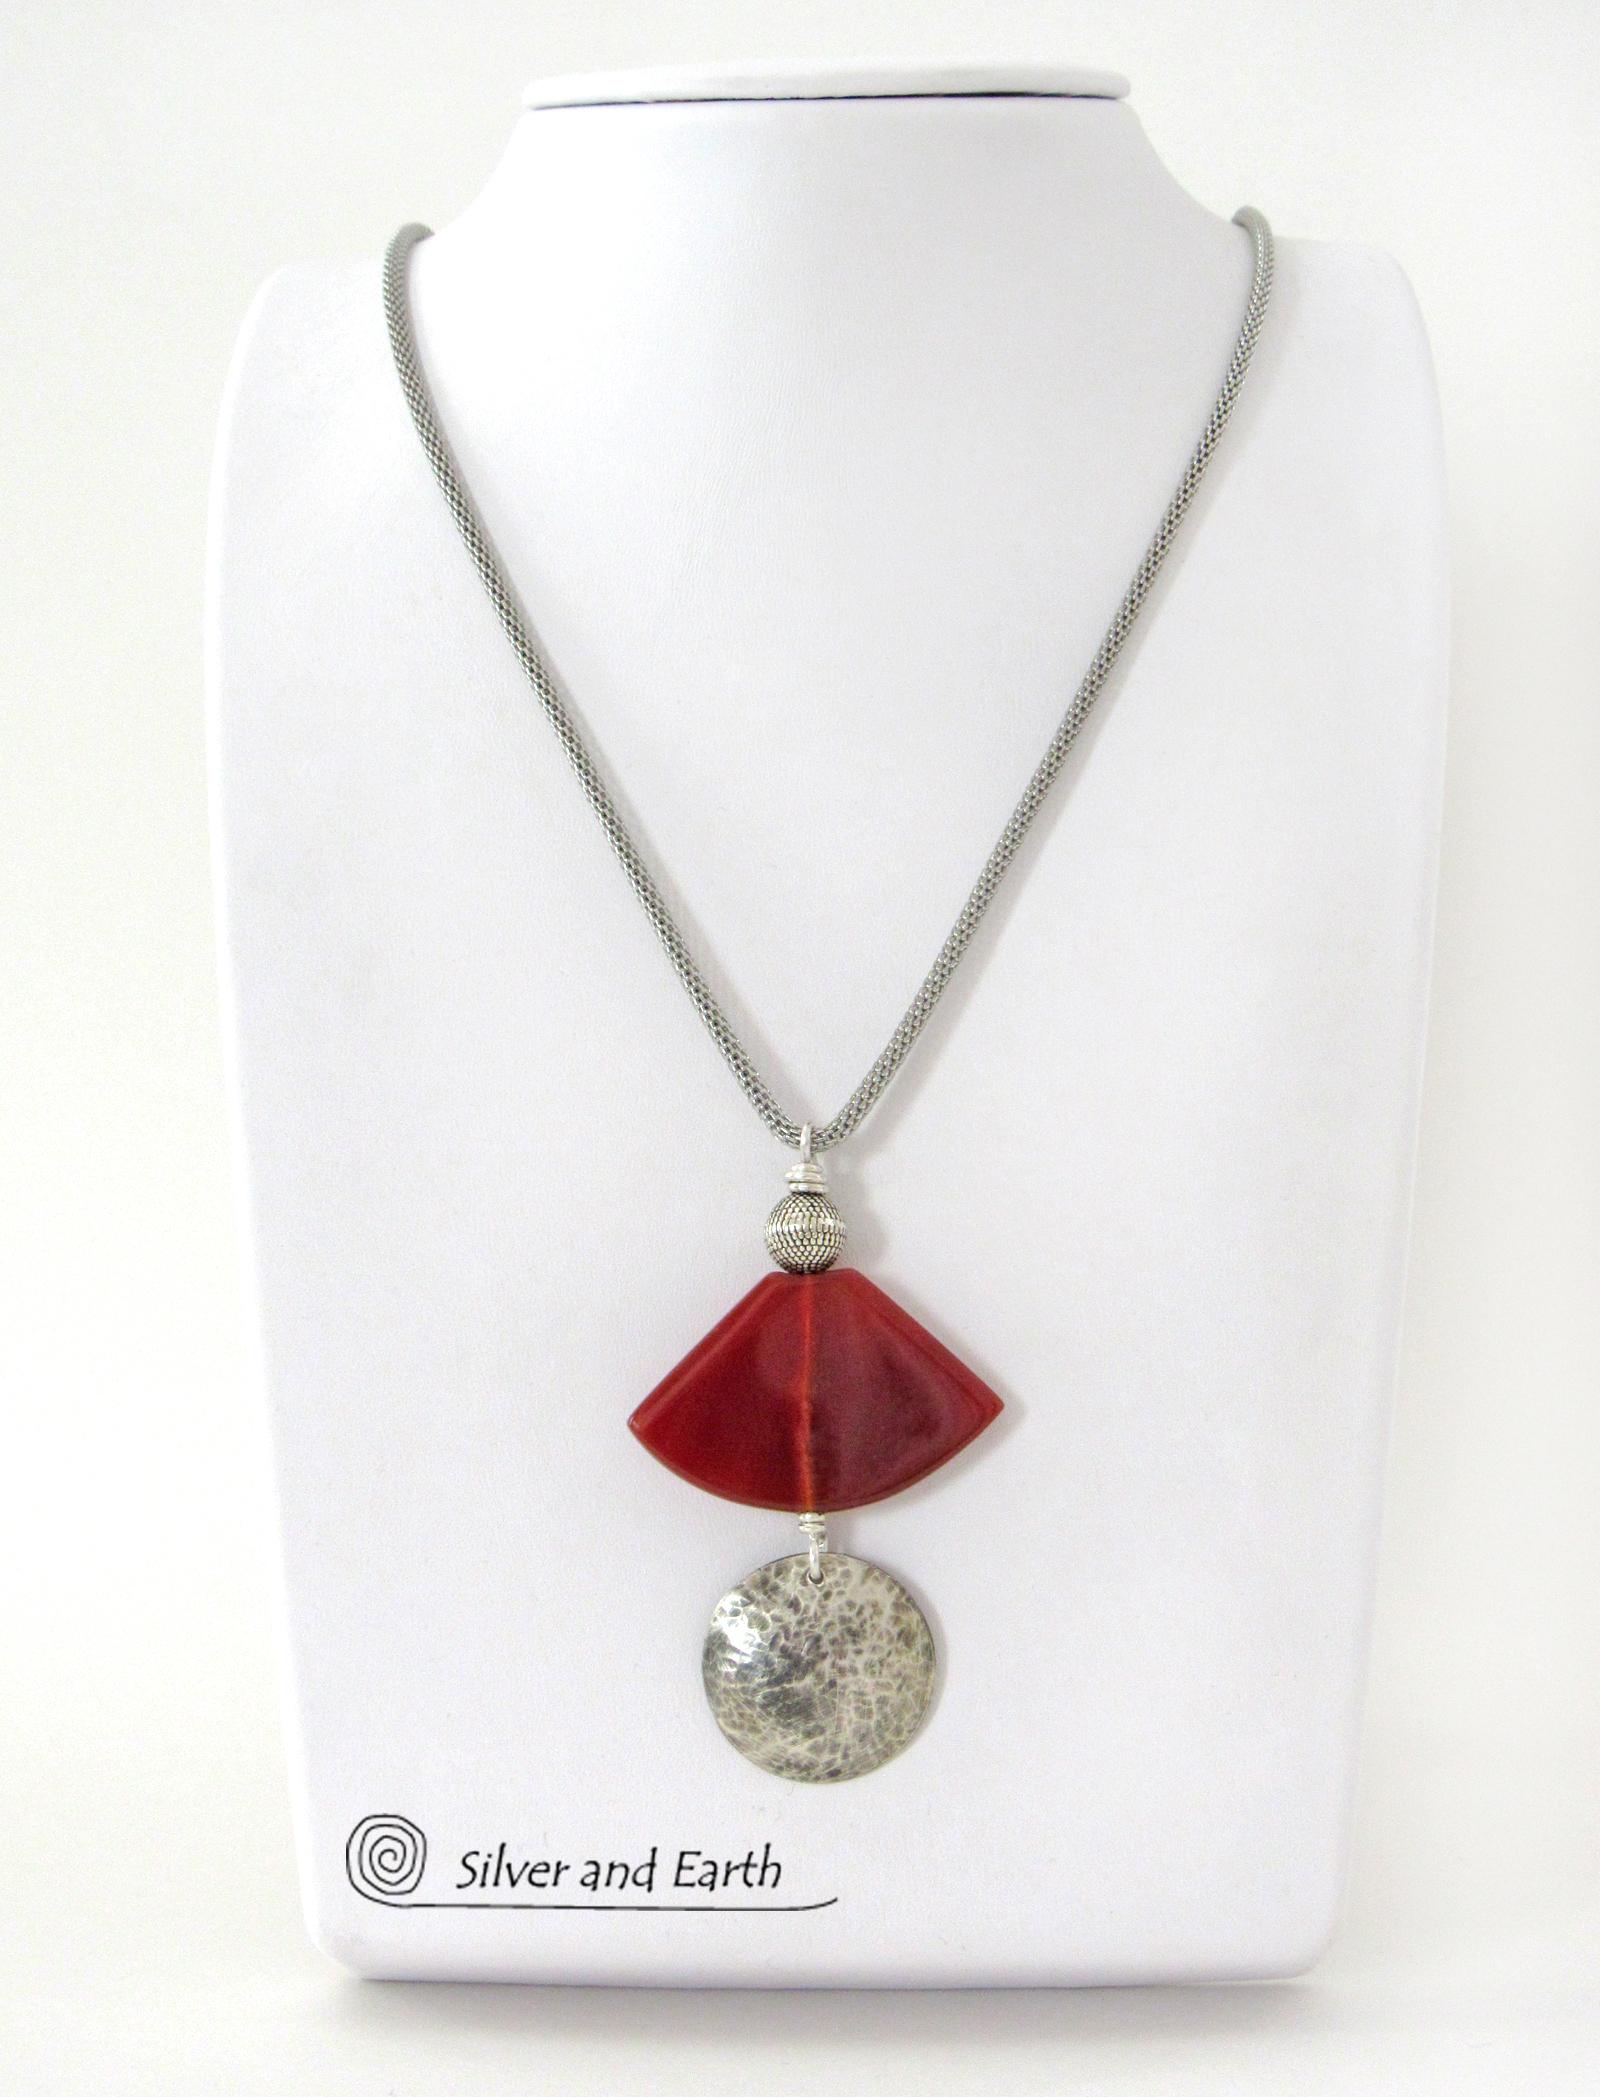 Hammered Sterling Silver & Carnelian Necklace - Unique Natural Stone Jewelry